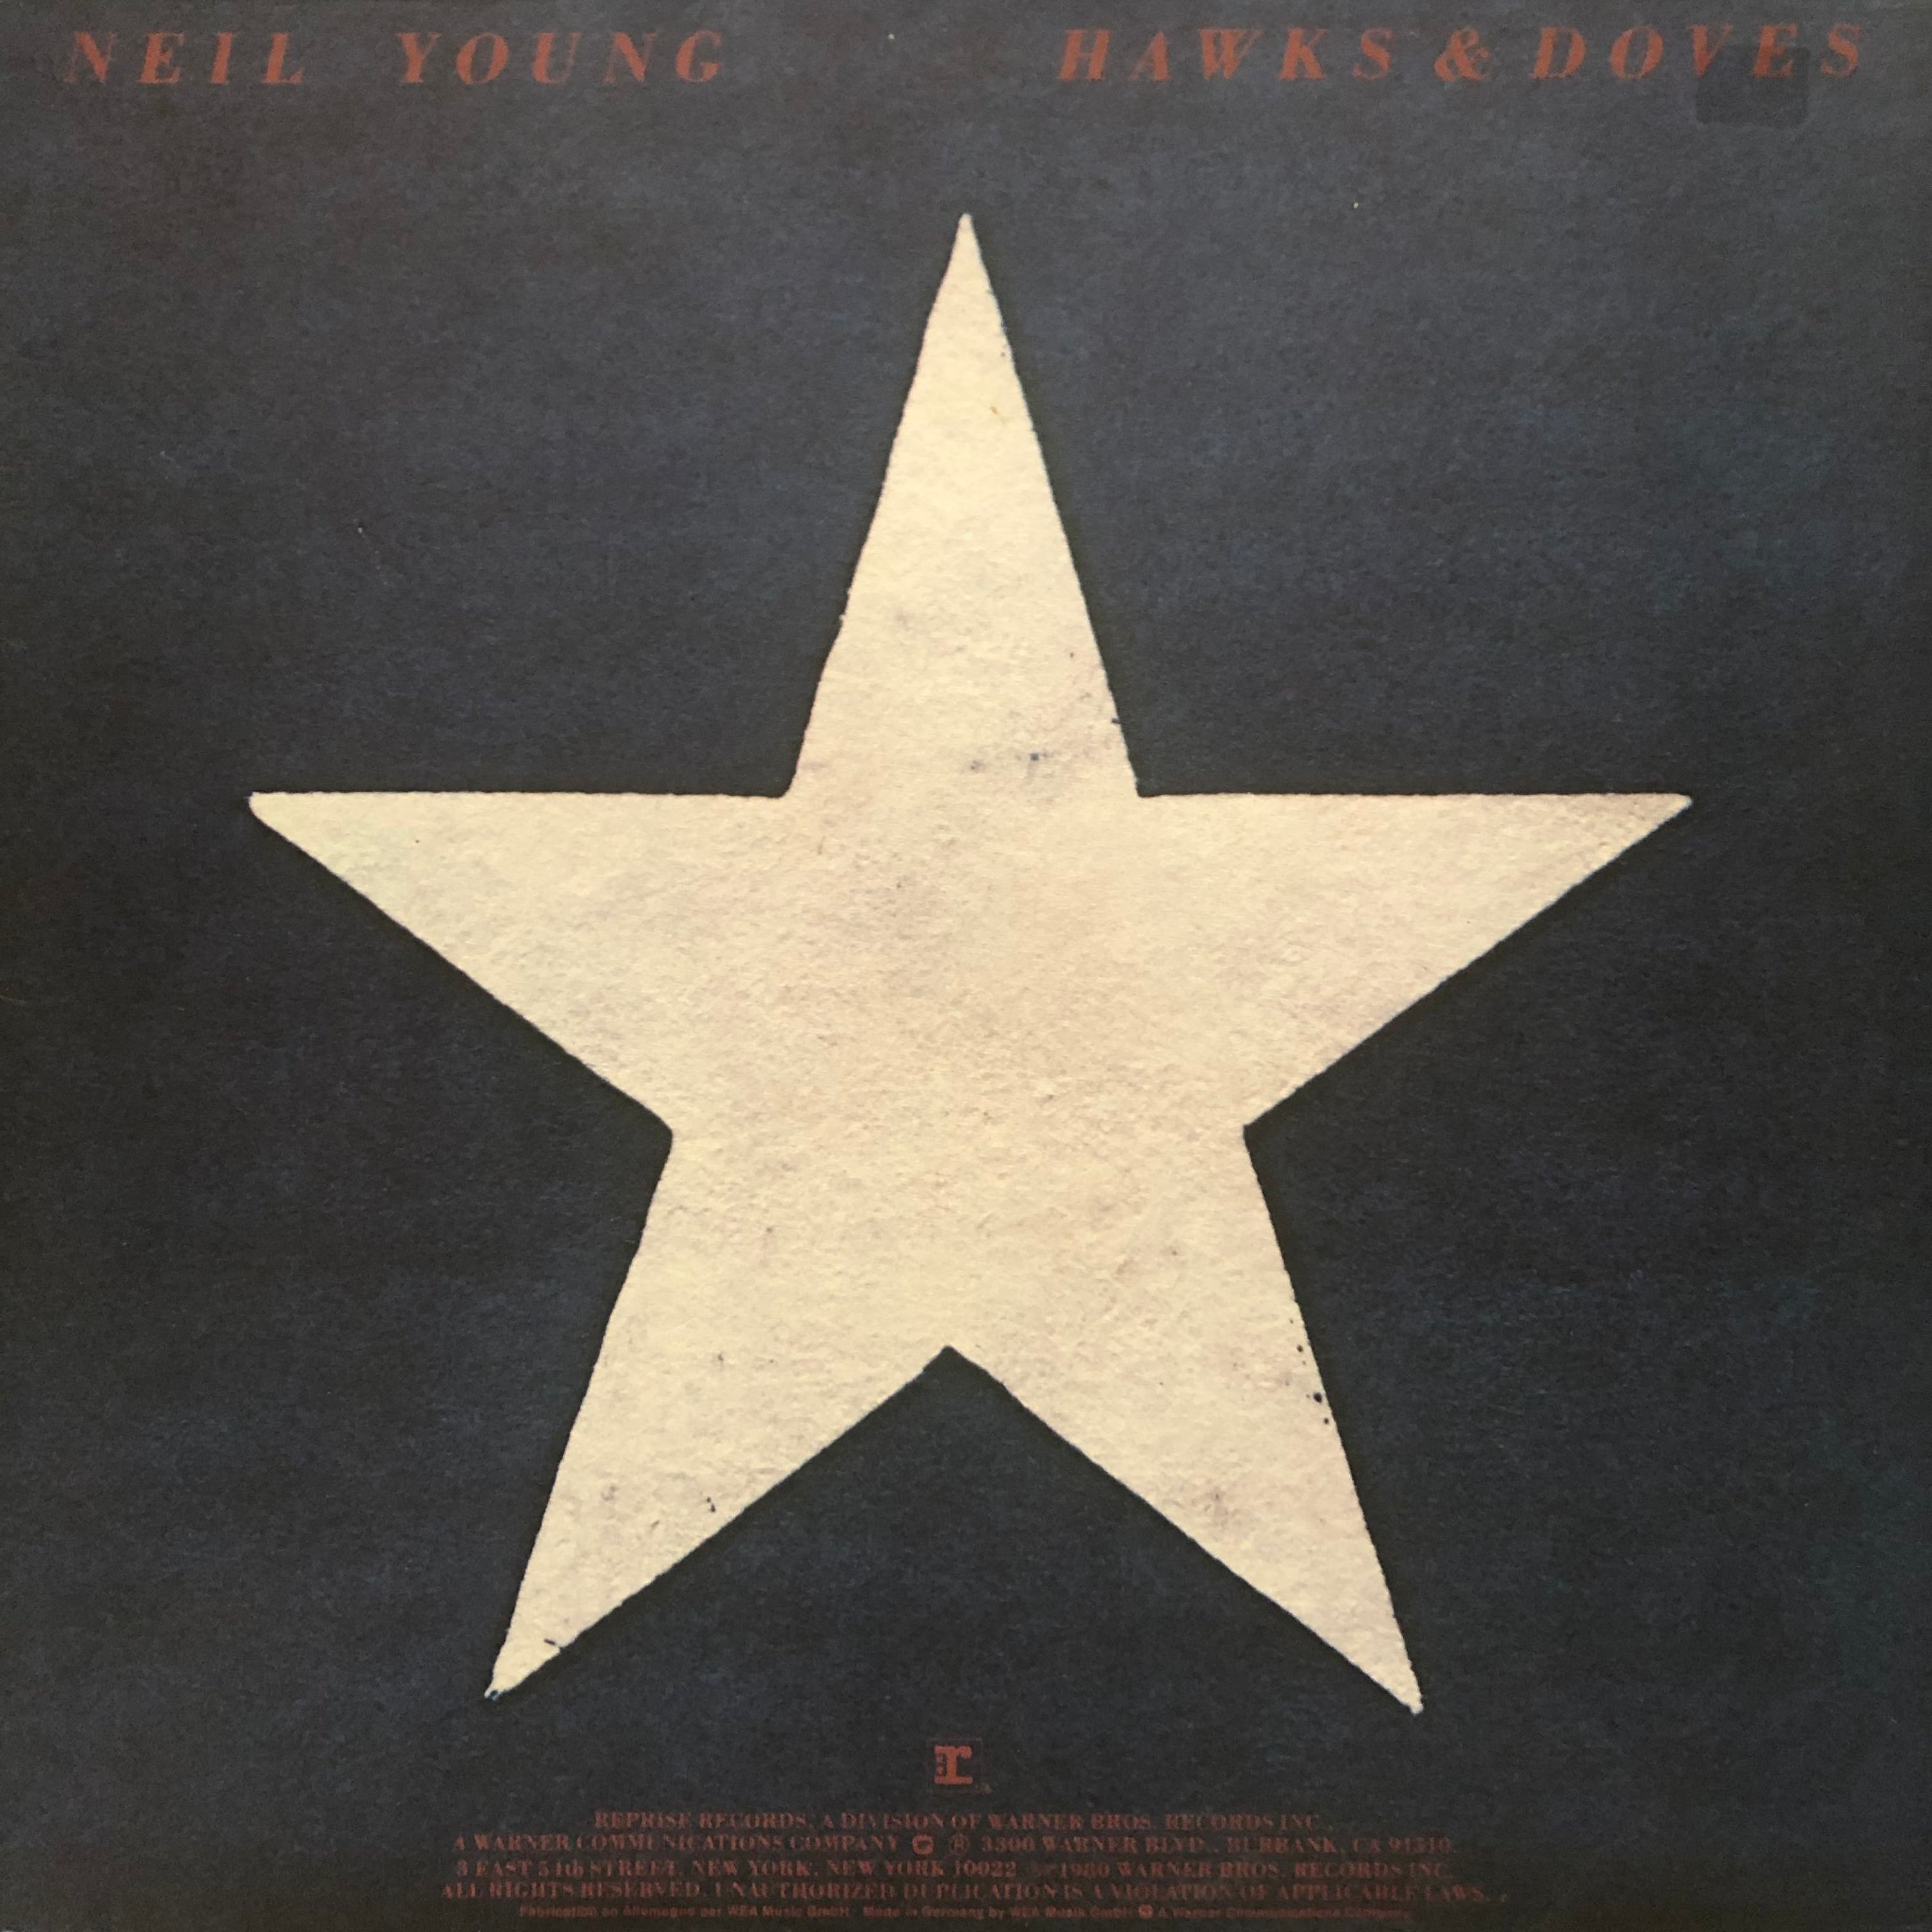 Neil Young ‎| Hawks & Doves